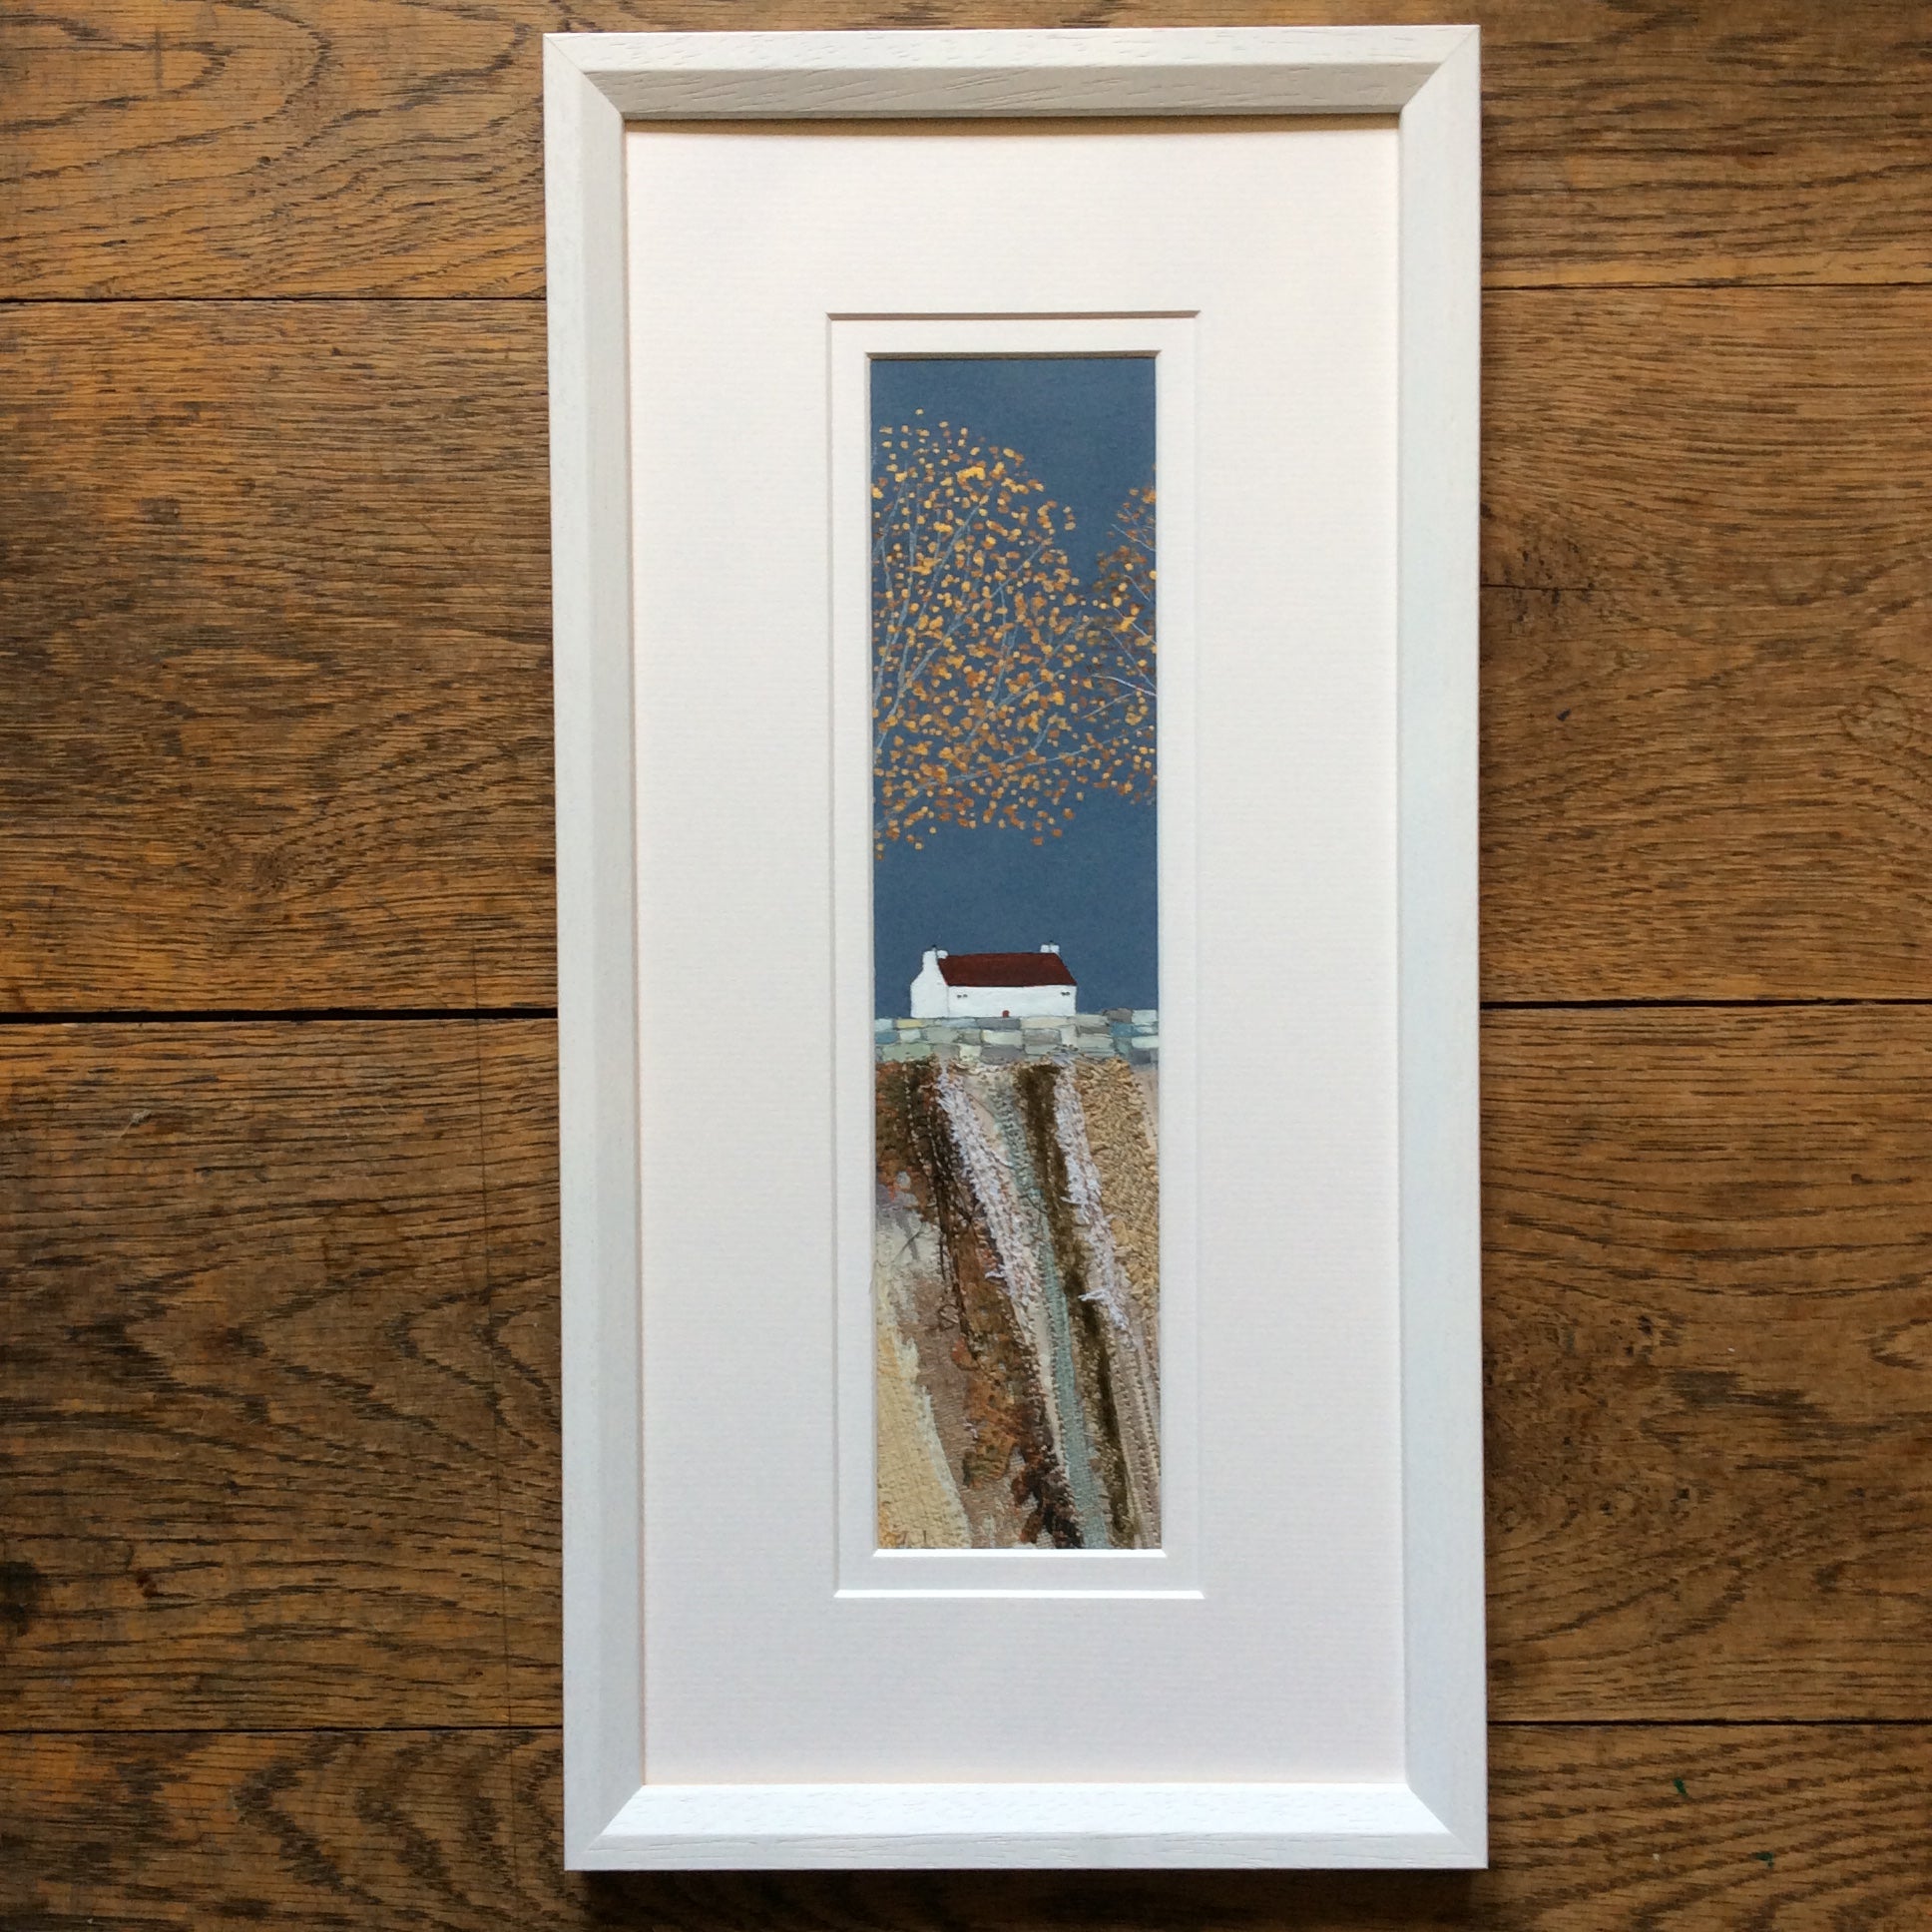 Mixed Media  art By Louise O’Hara “Golden leaves”